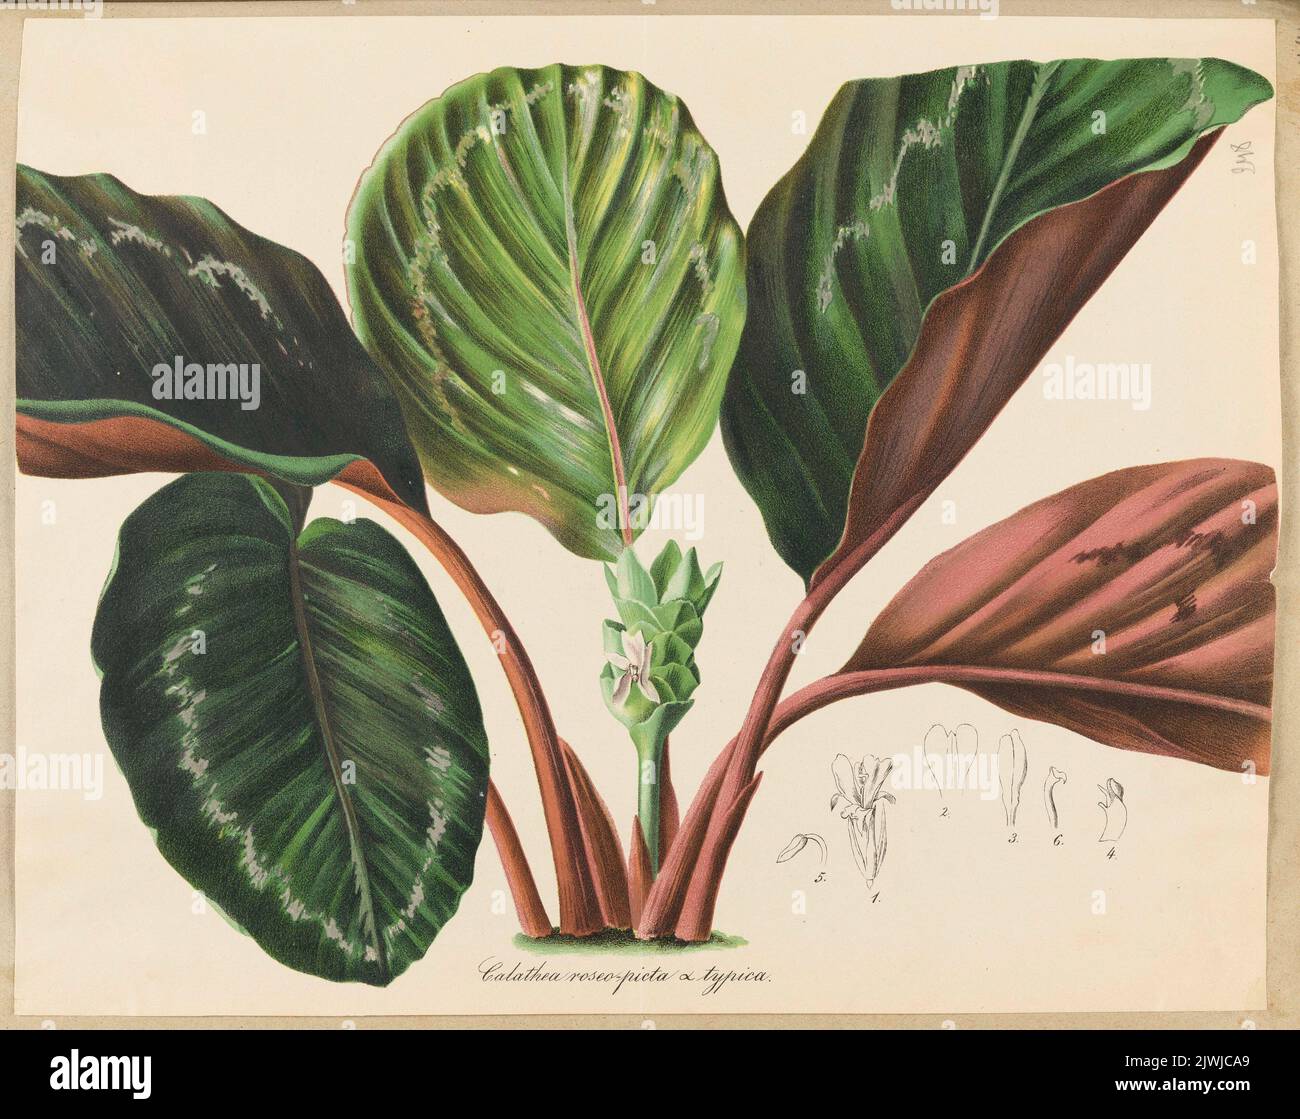 Calathea roseo-picta (sheet from a herbarium). unknown, graphic artist Stock Photo